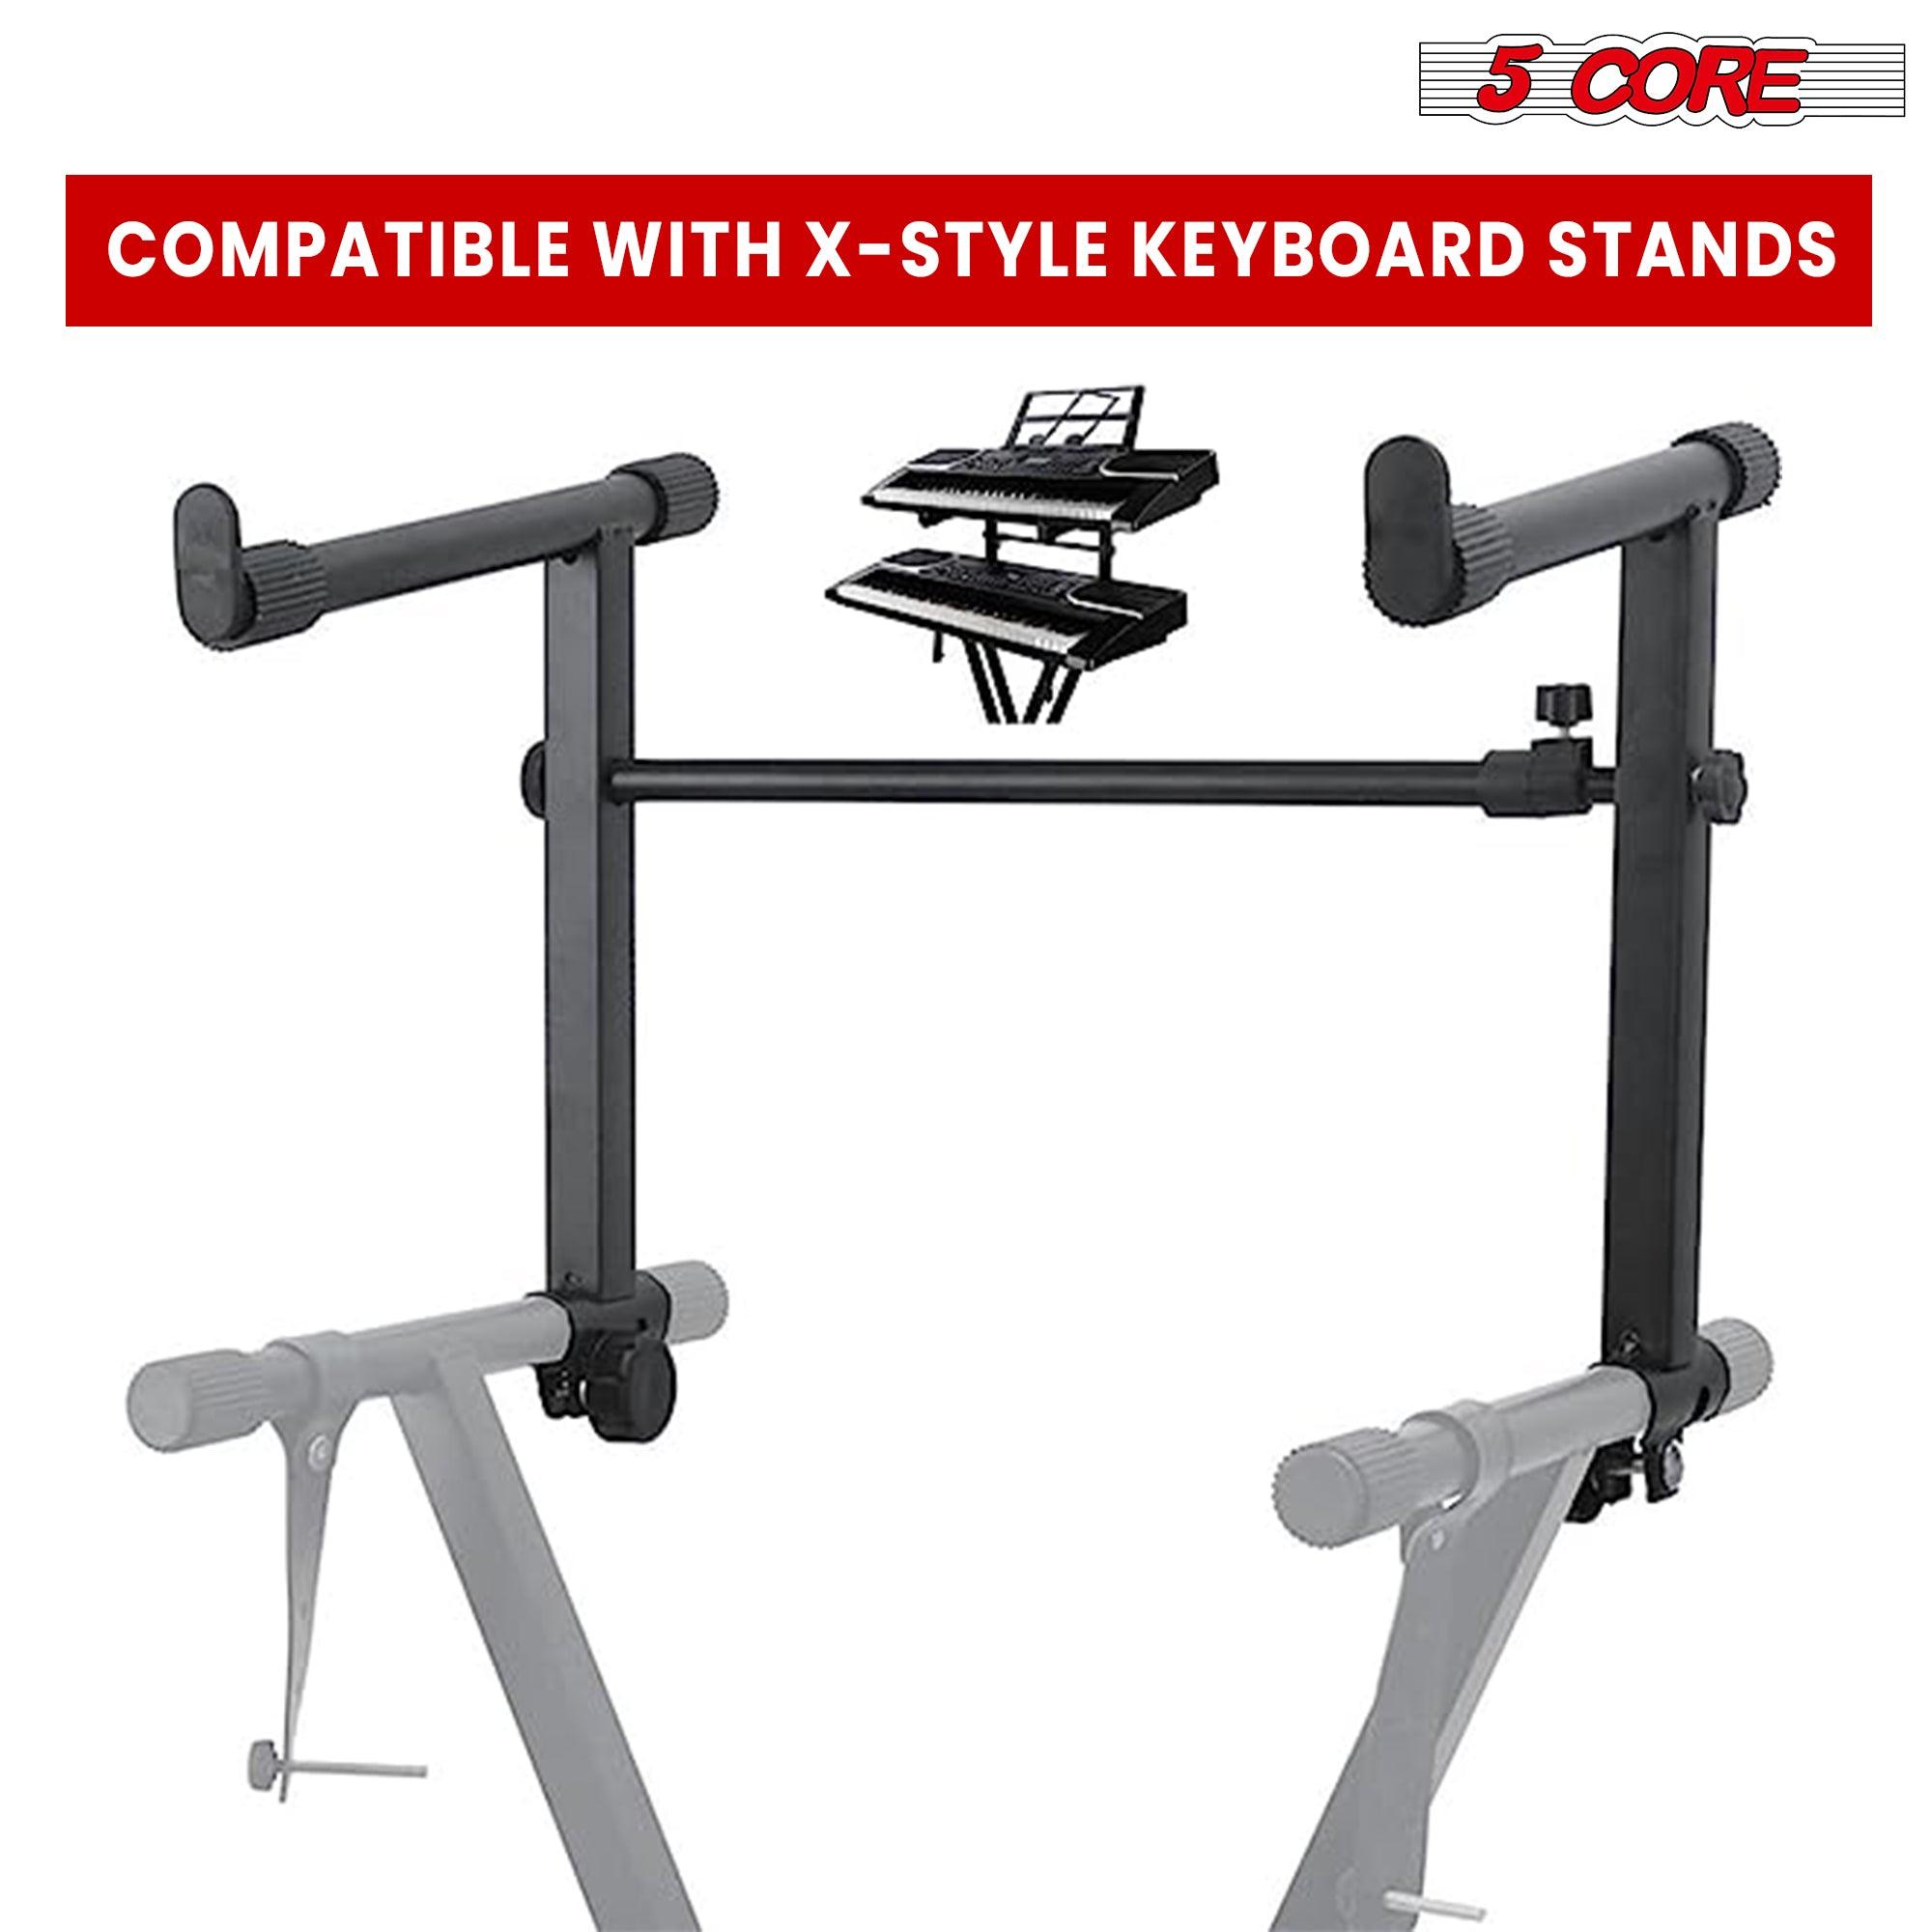 5 Core 2 tier Keyboard Stand Extension Adapter Adjustable 2nd Tier - VirtuousWares:Global